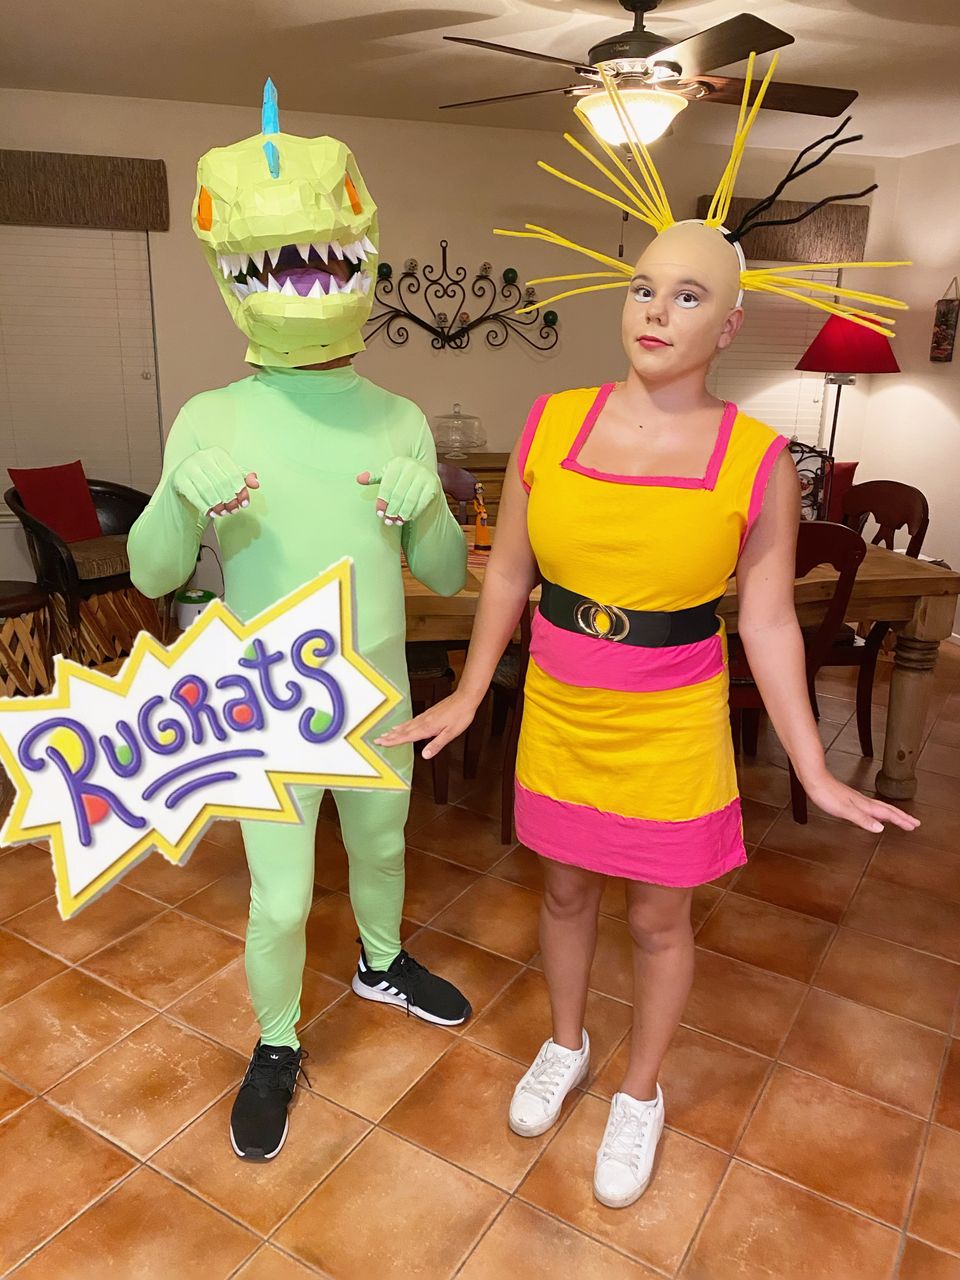 22 Unique Couples Halloween Costumes You Haven't Seen A Million Times | HuffPost Life